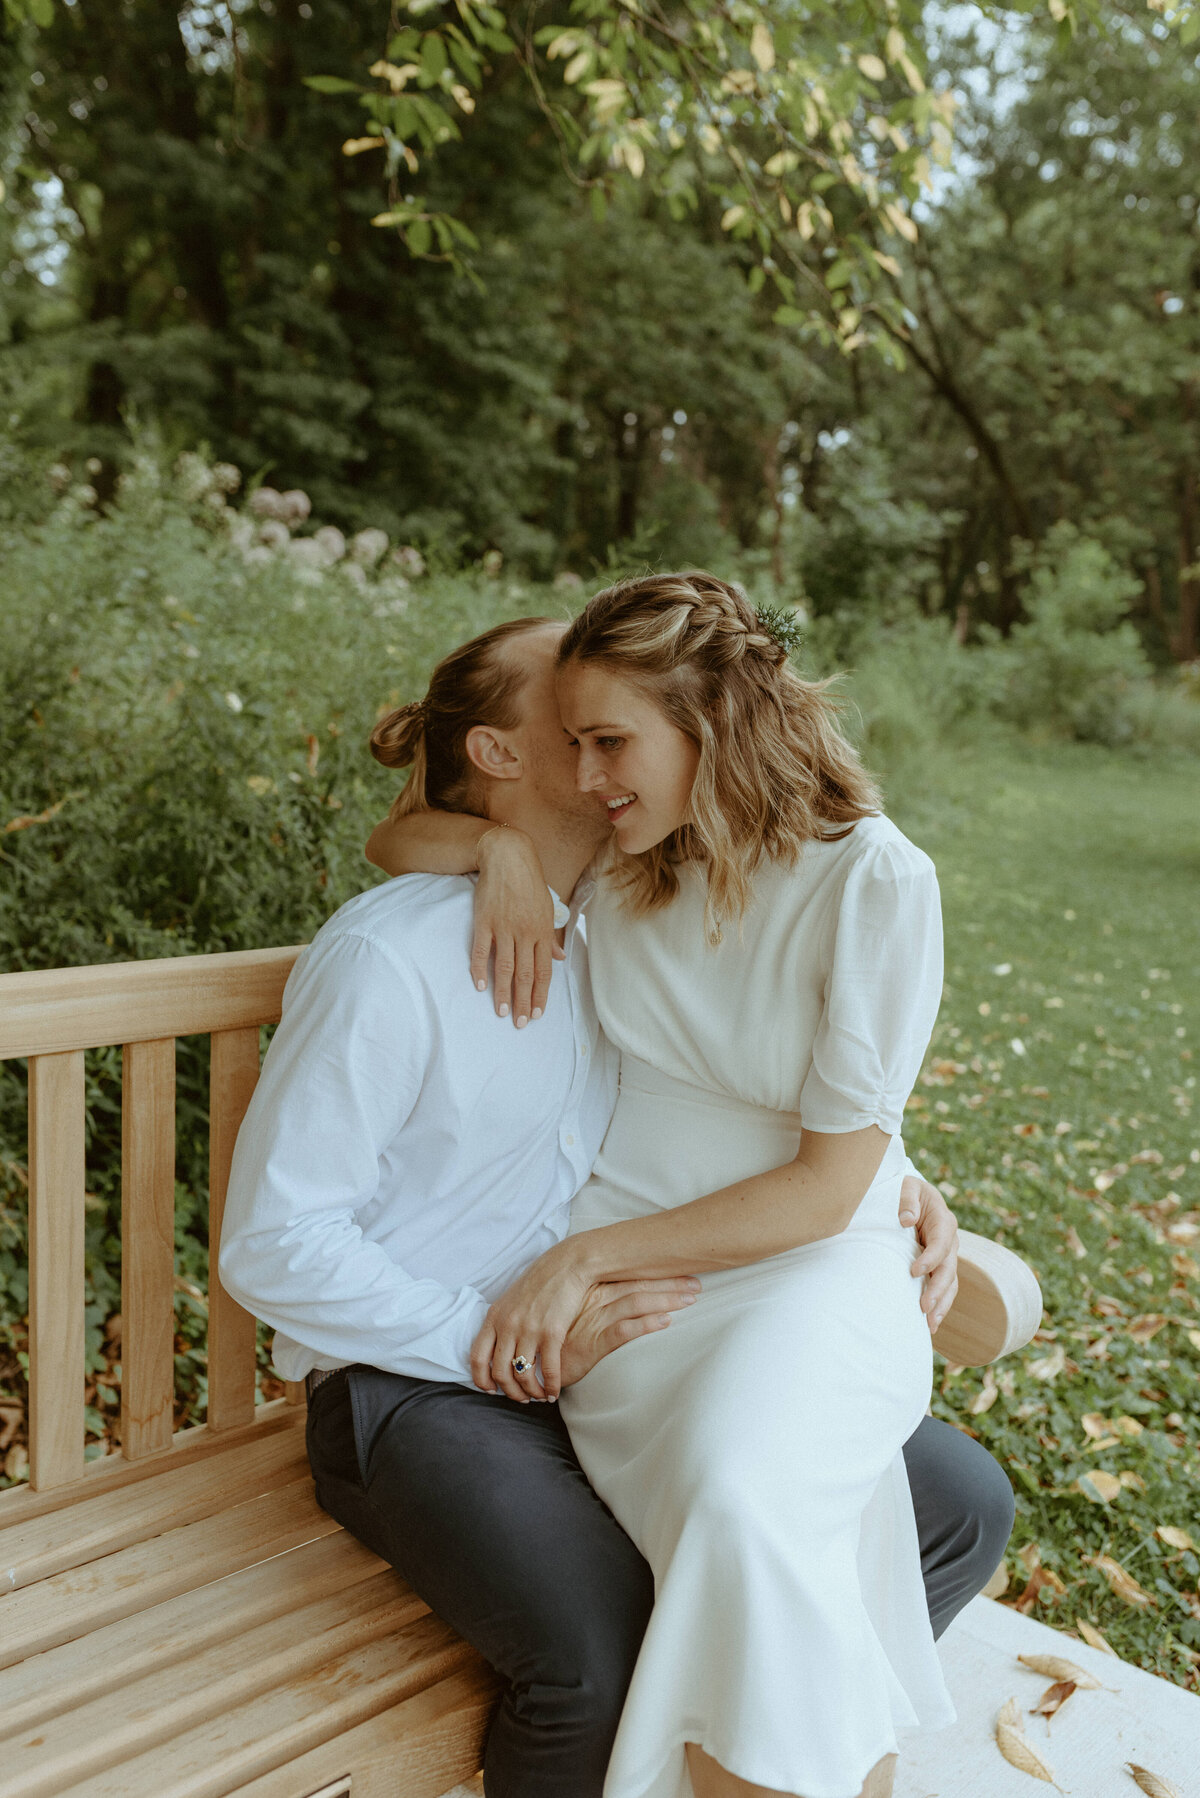 JustJessPhotography_Indianapolis Photographer_Brittany&Hank Holliday Park elopement87